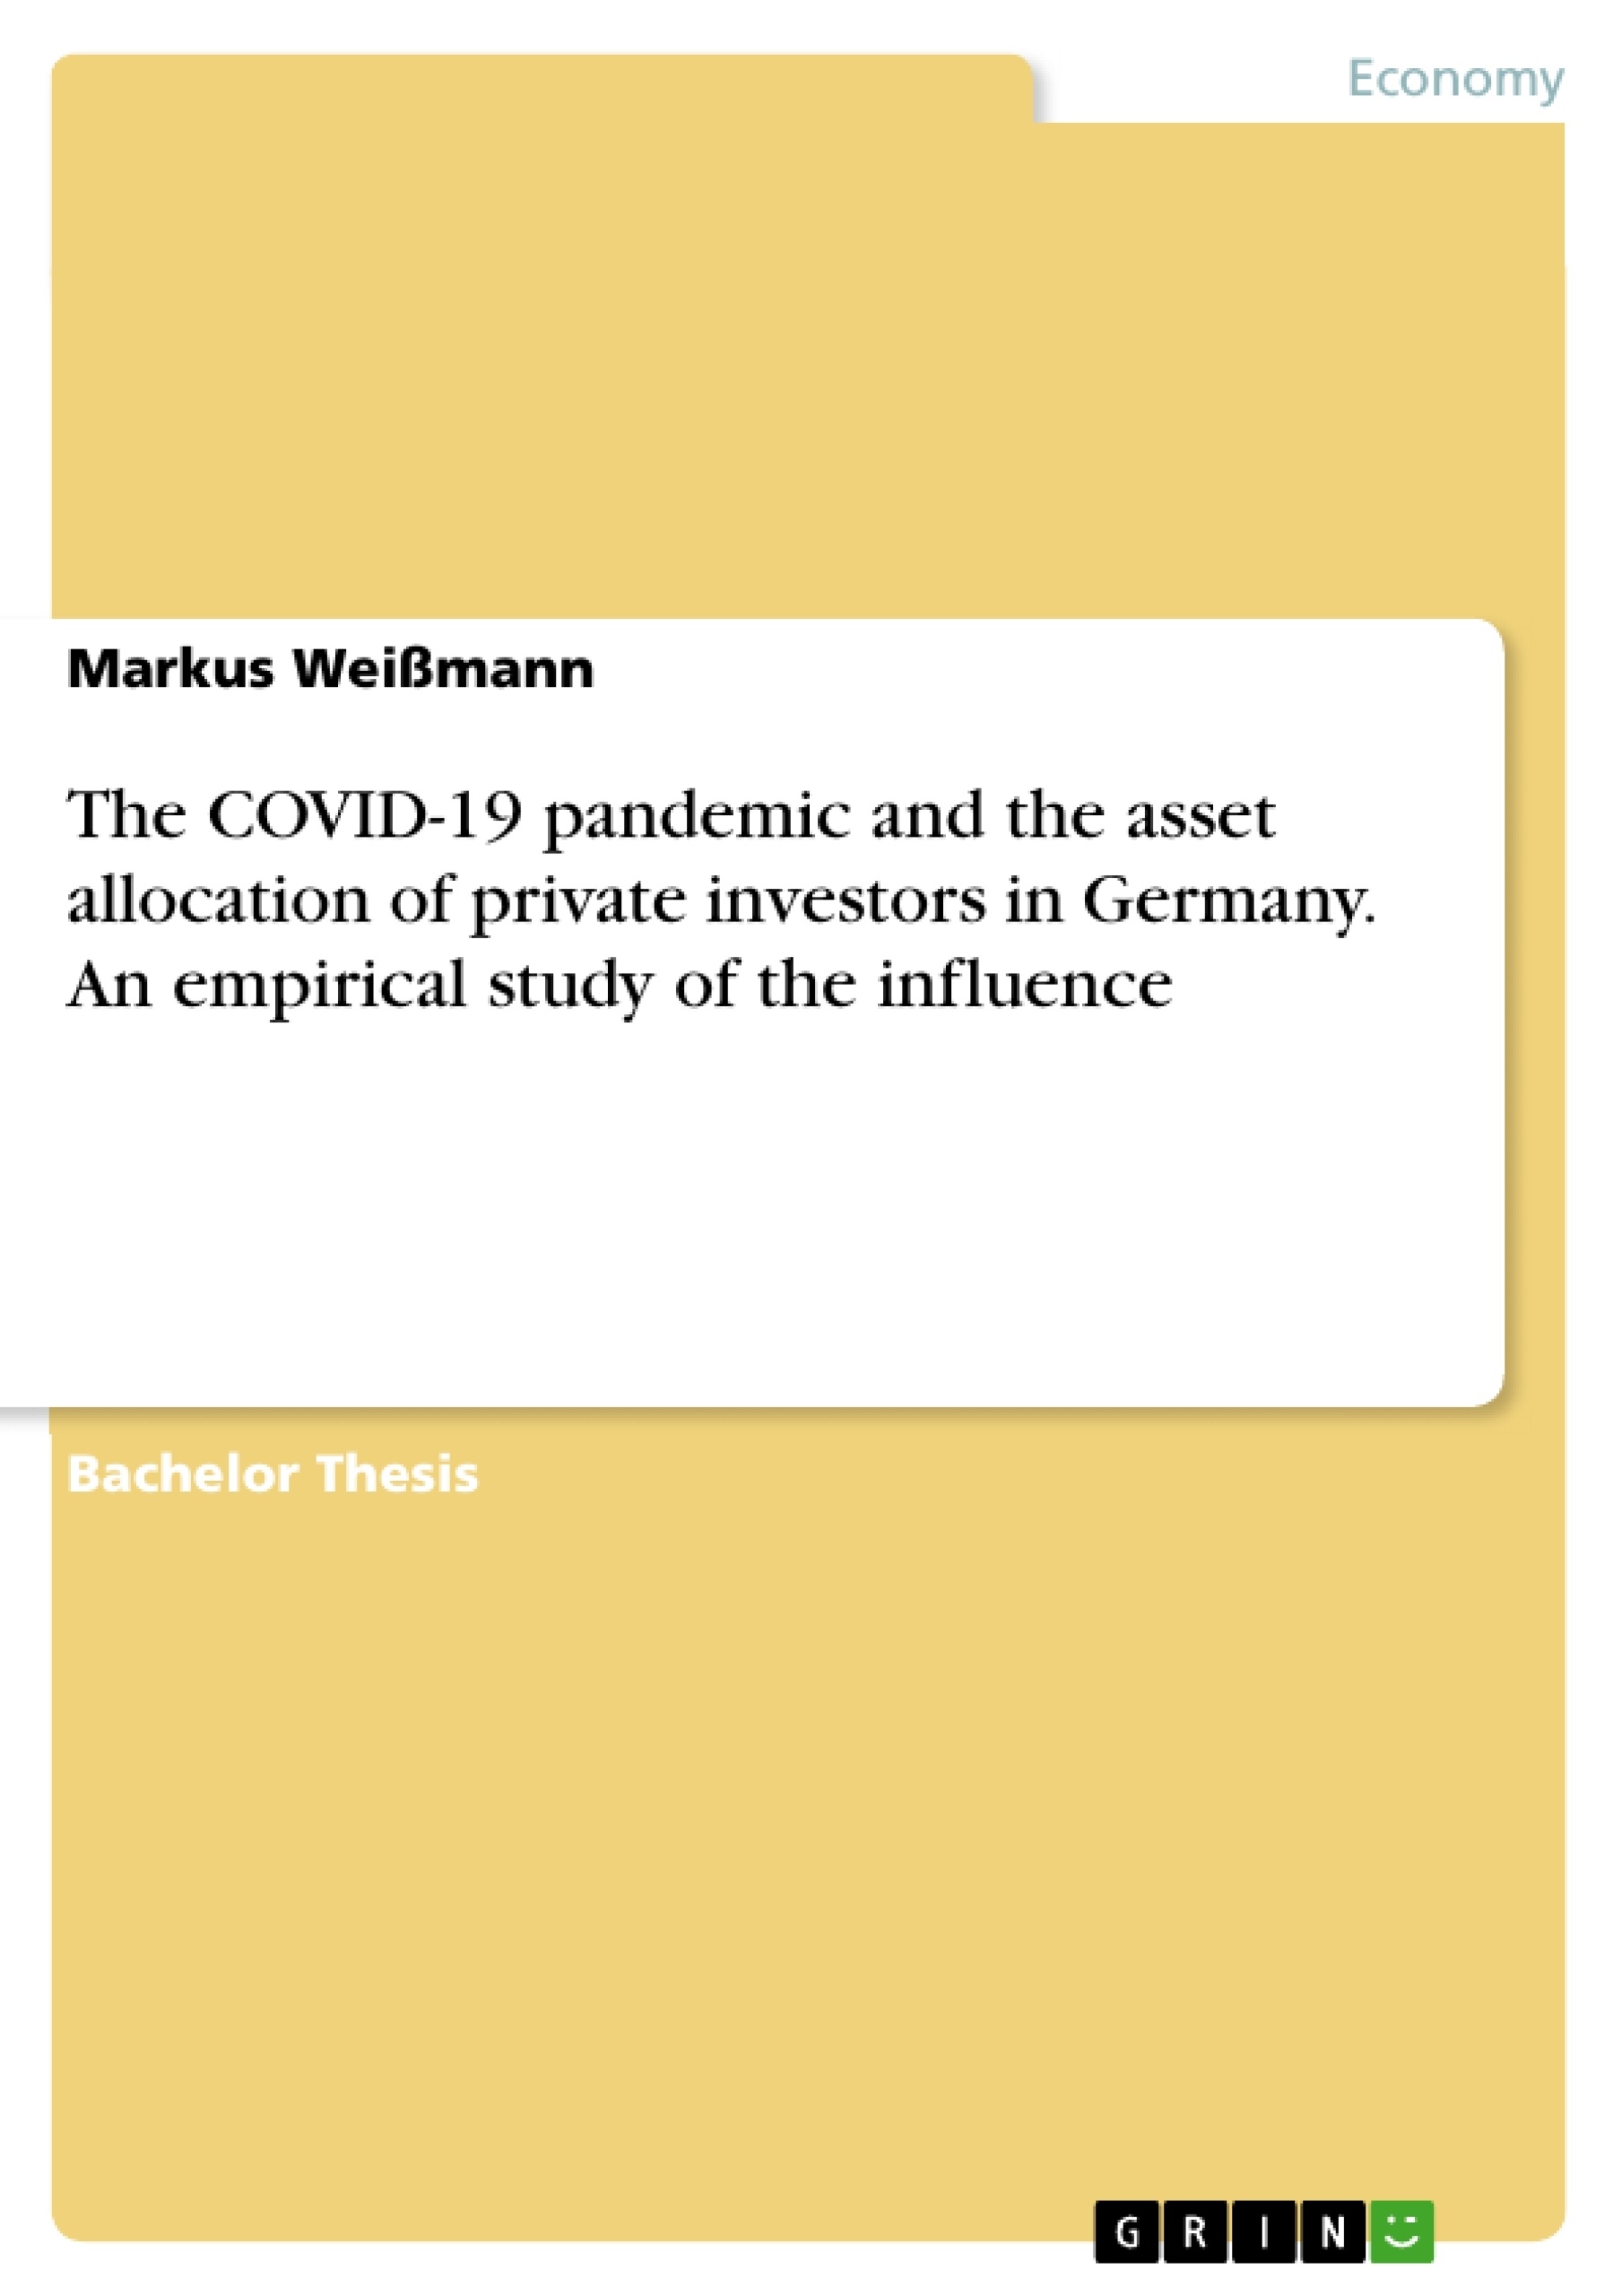 Title: The COVID-19 pandemic and the asset allocation of private investors in Germany. An empirical study of the influence